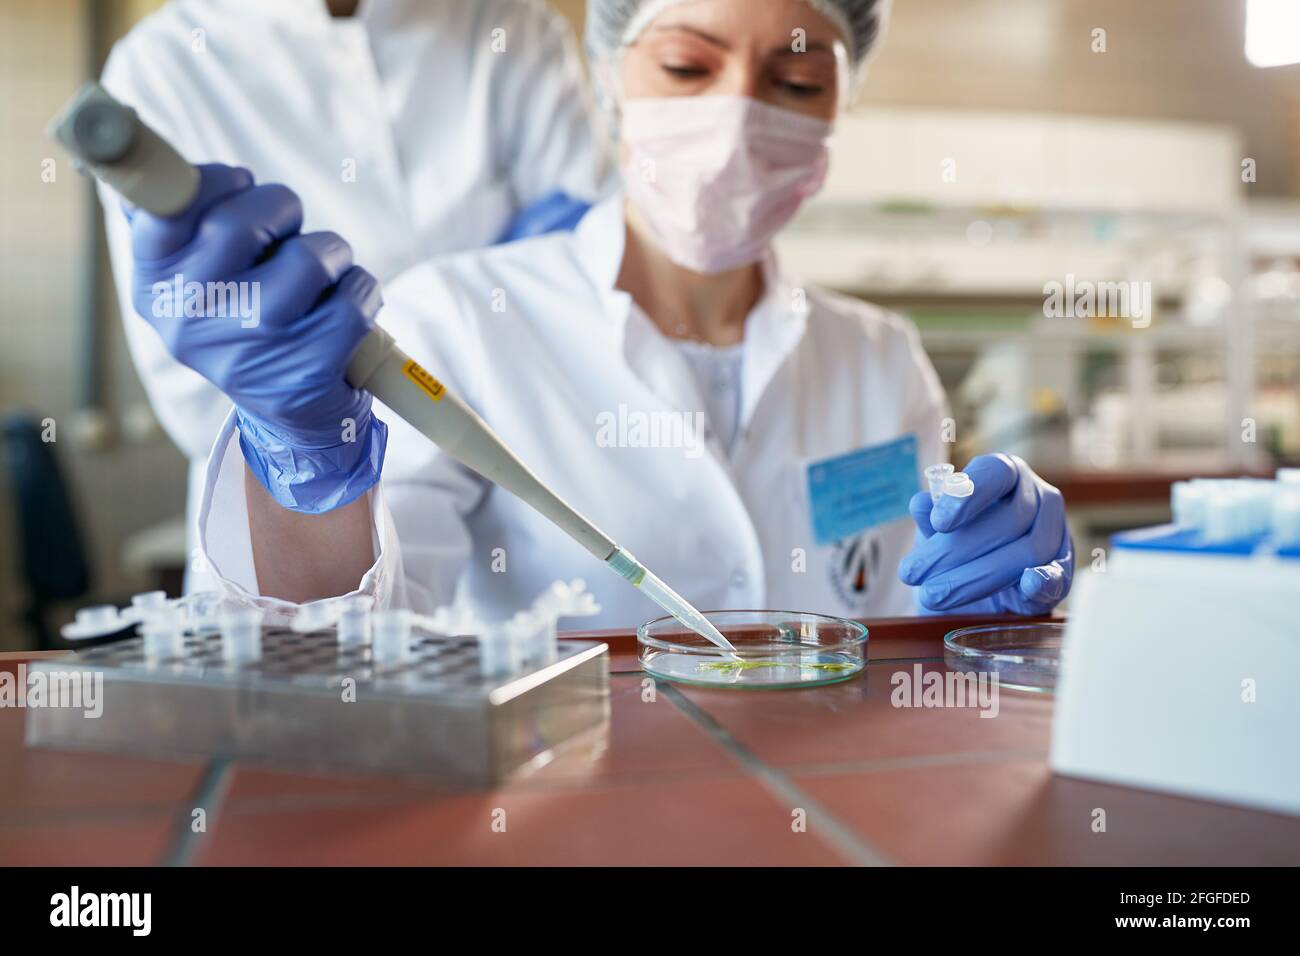 A young female scientist in protective gear uses a pipette to take a sample in a sterile laboratory environment. Science, chemistry, lab, people Stock Photo